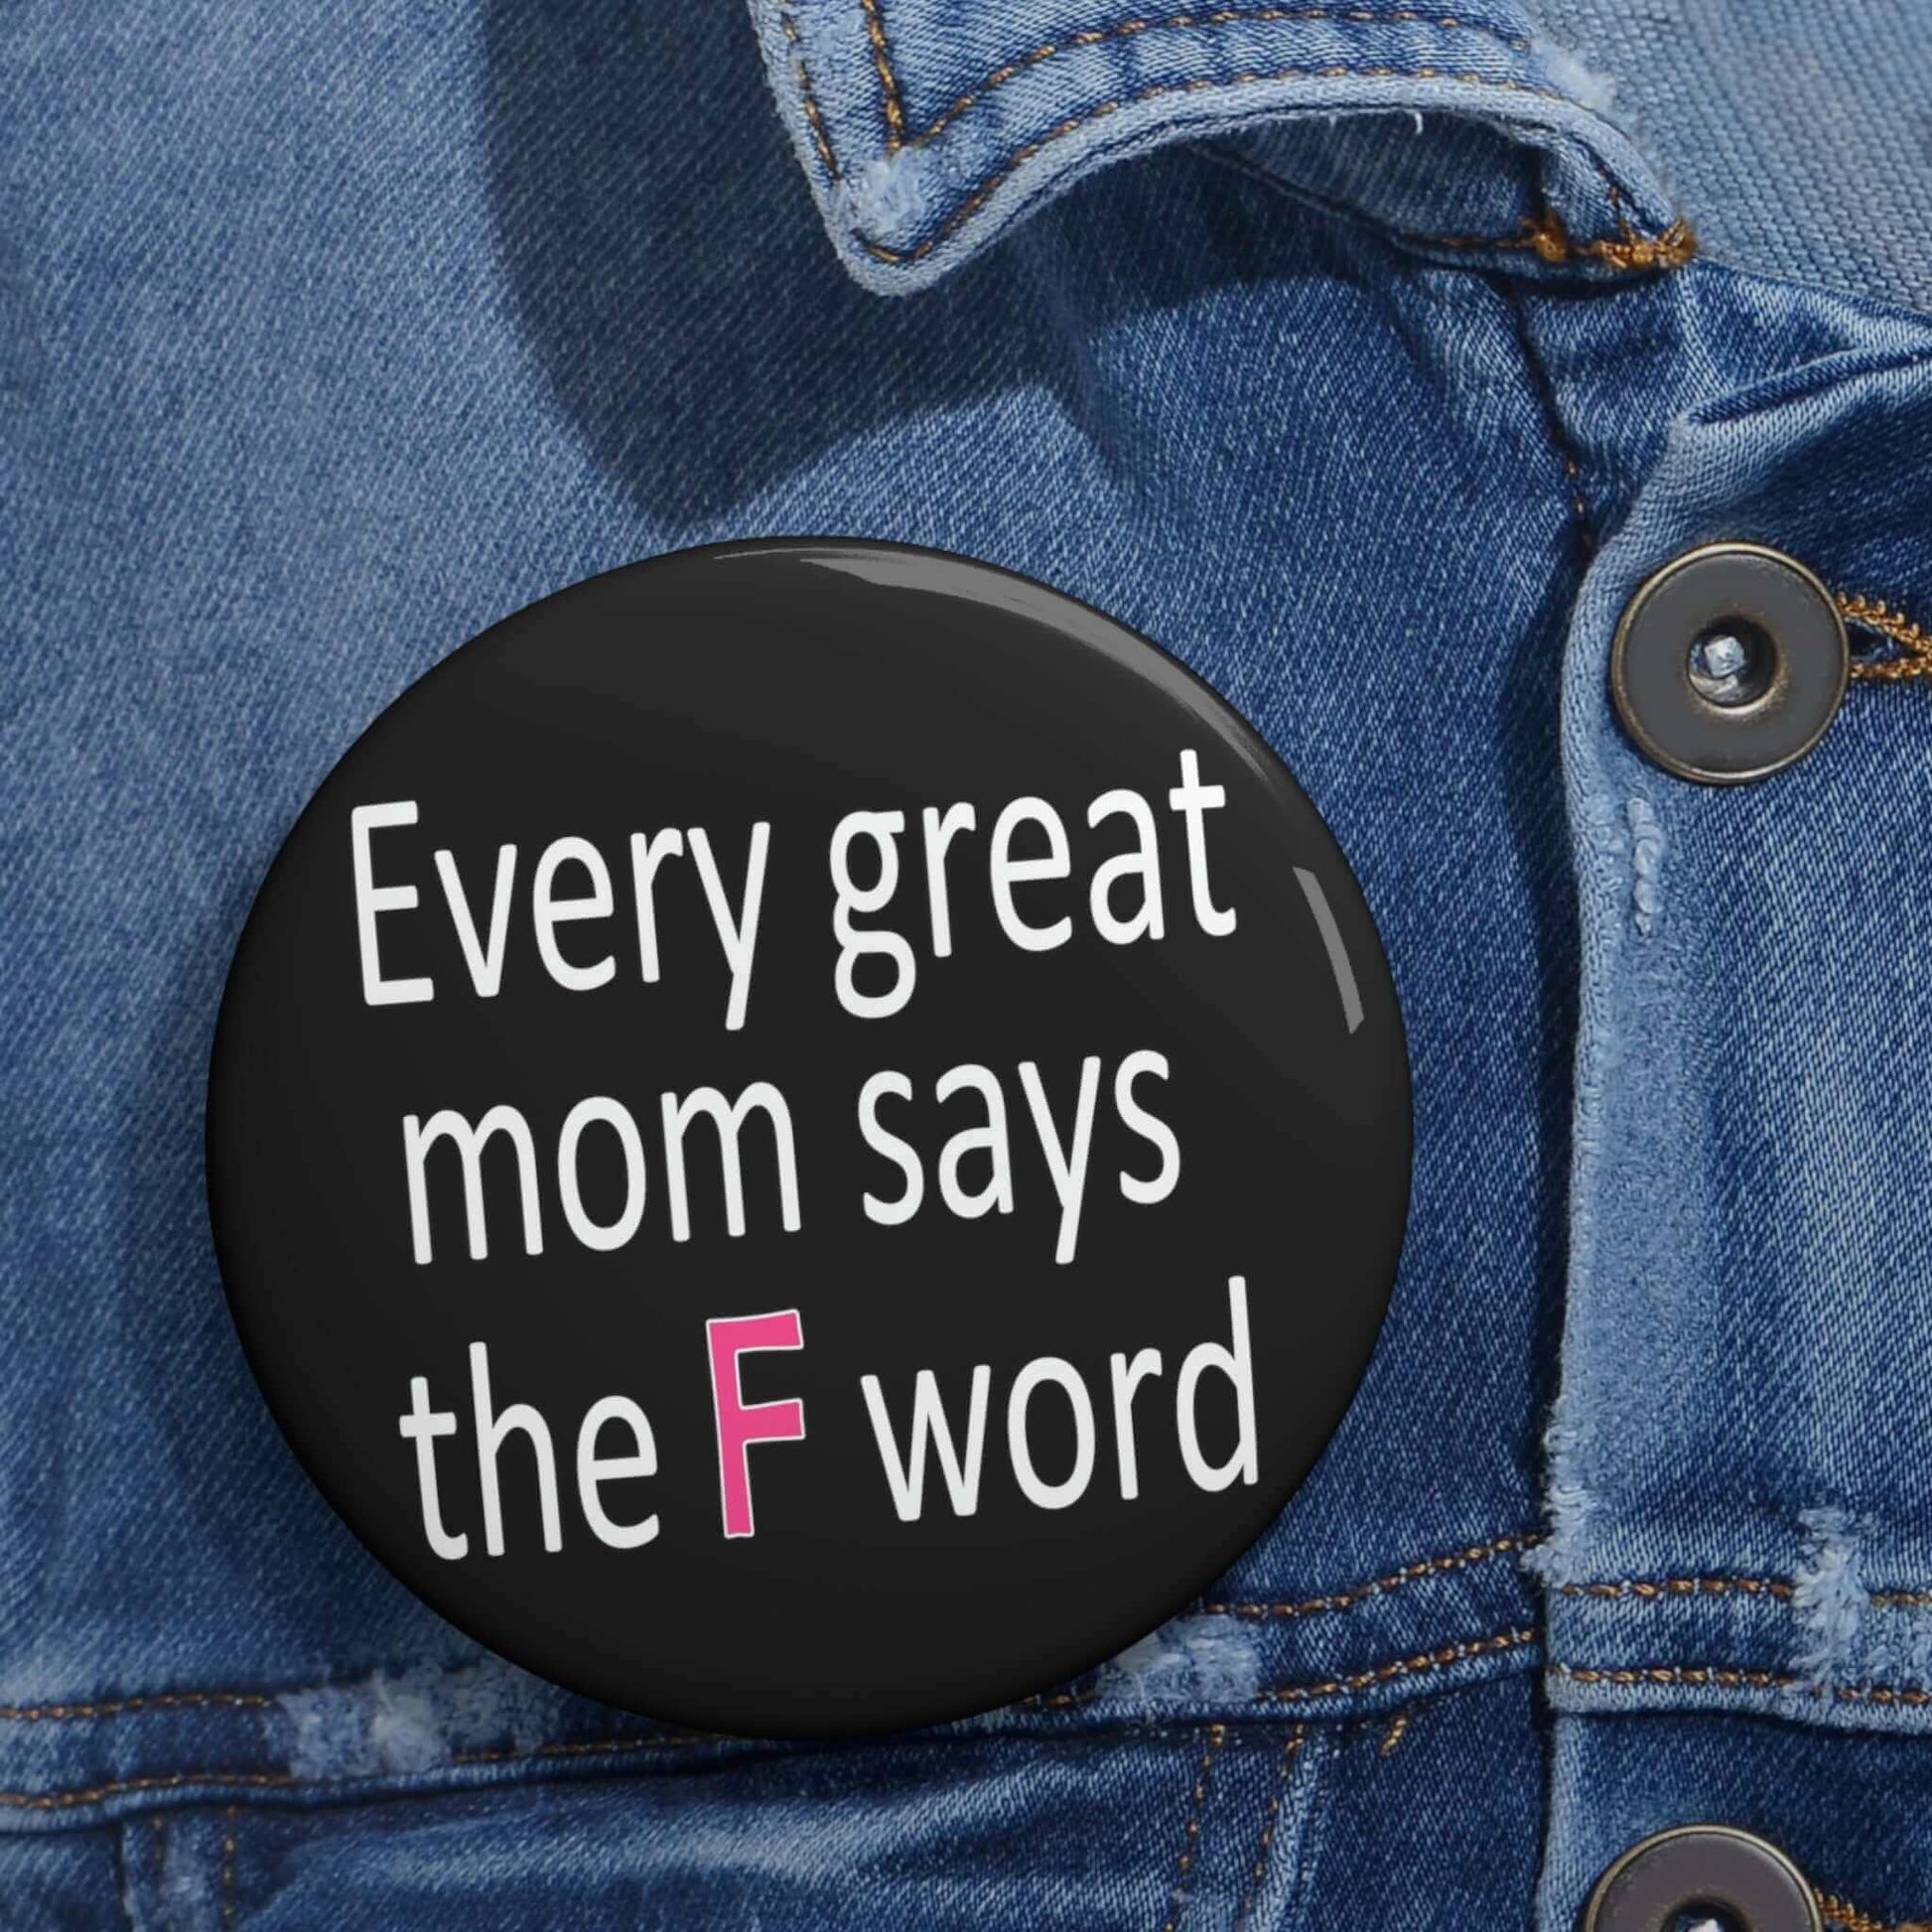 Every great mom says the F word pin-back button.